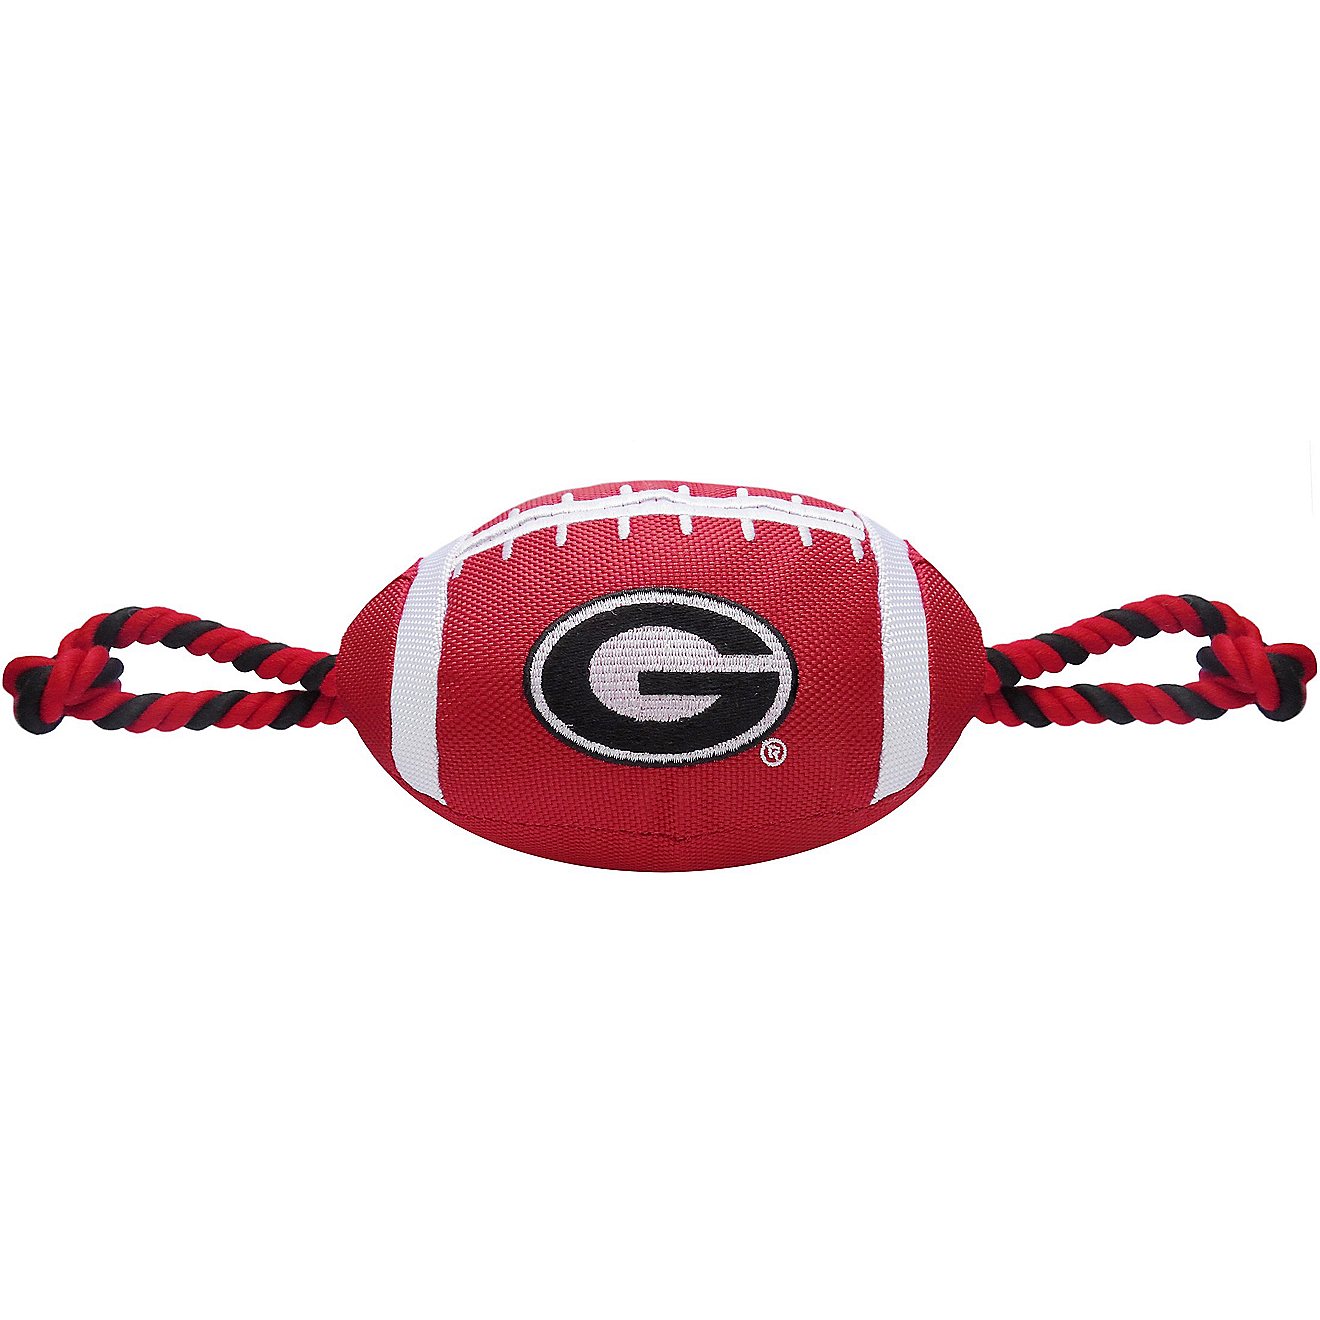 Pets First University of Georgia Nylon Football Rope Toy                                                                         - view number 1